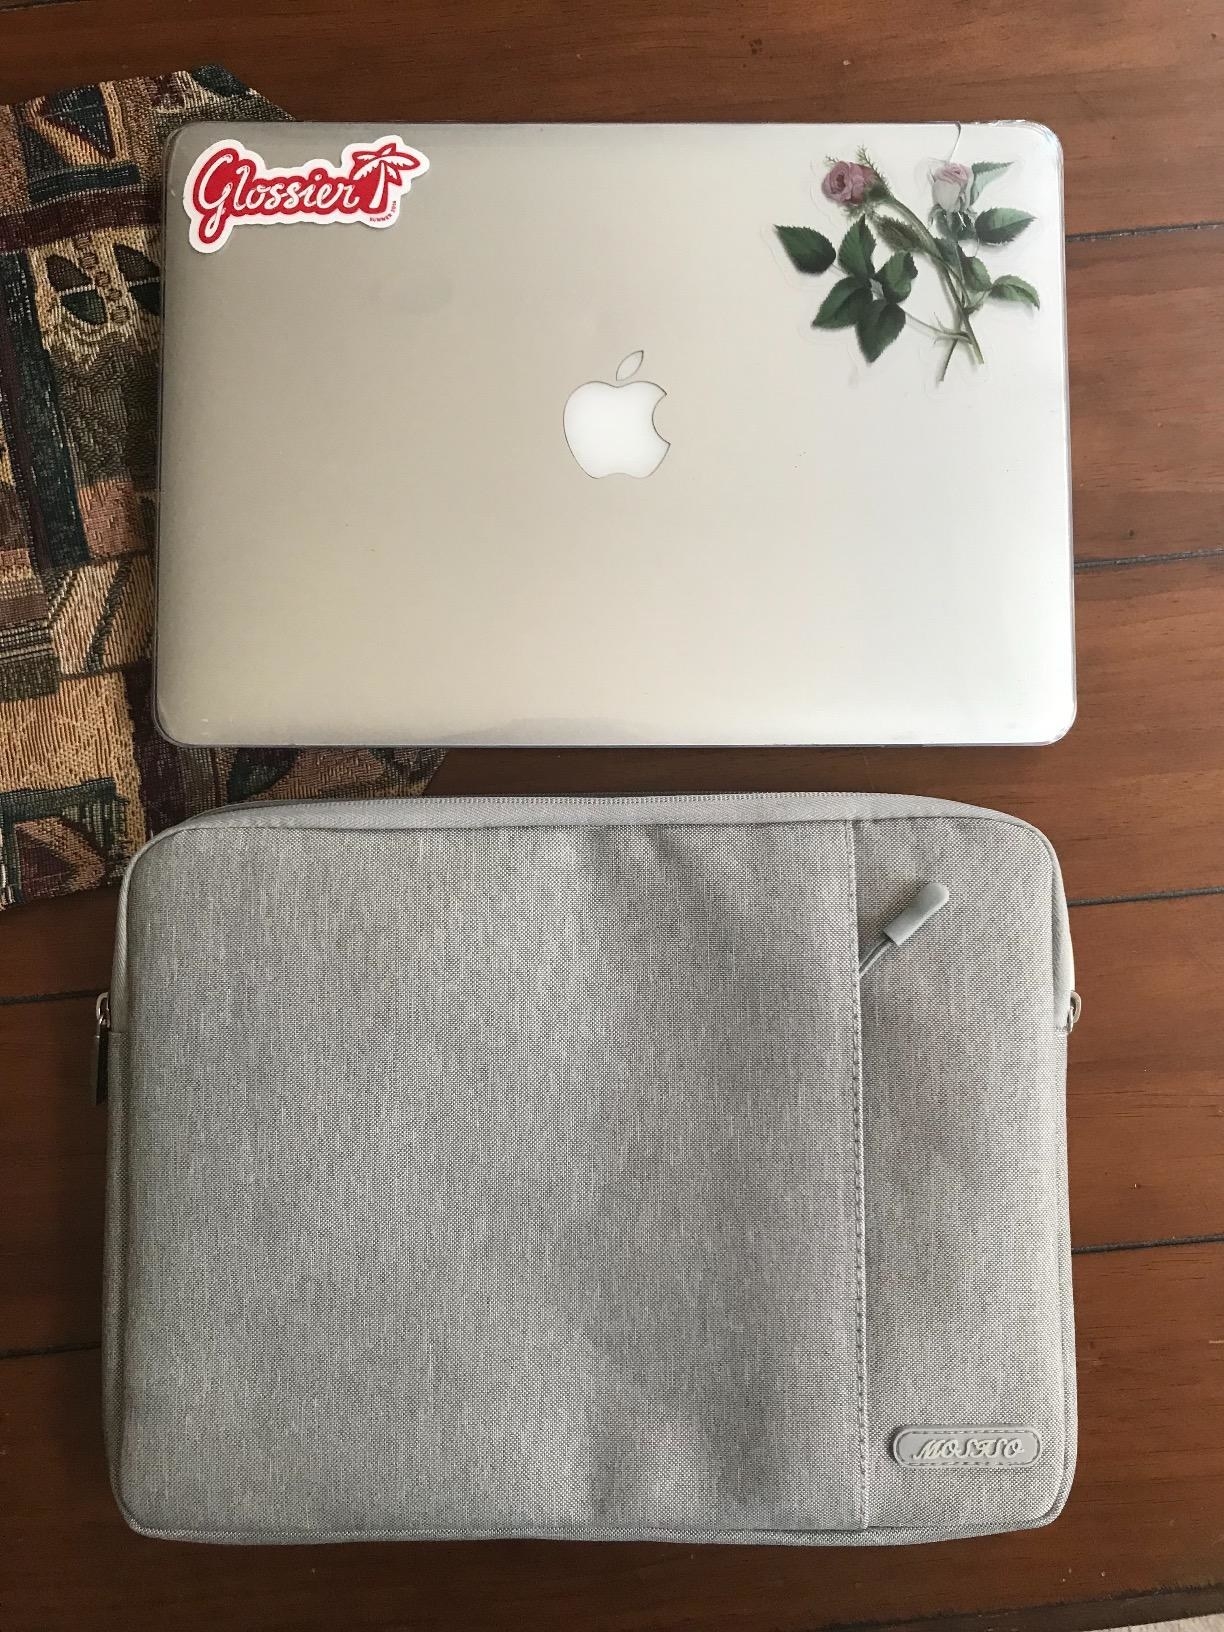 Reviewer&#x27;s photo of their silver iMac laptop beside the gray laptop case